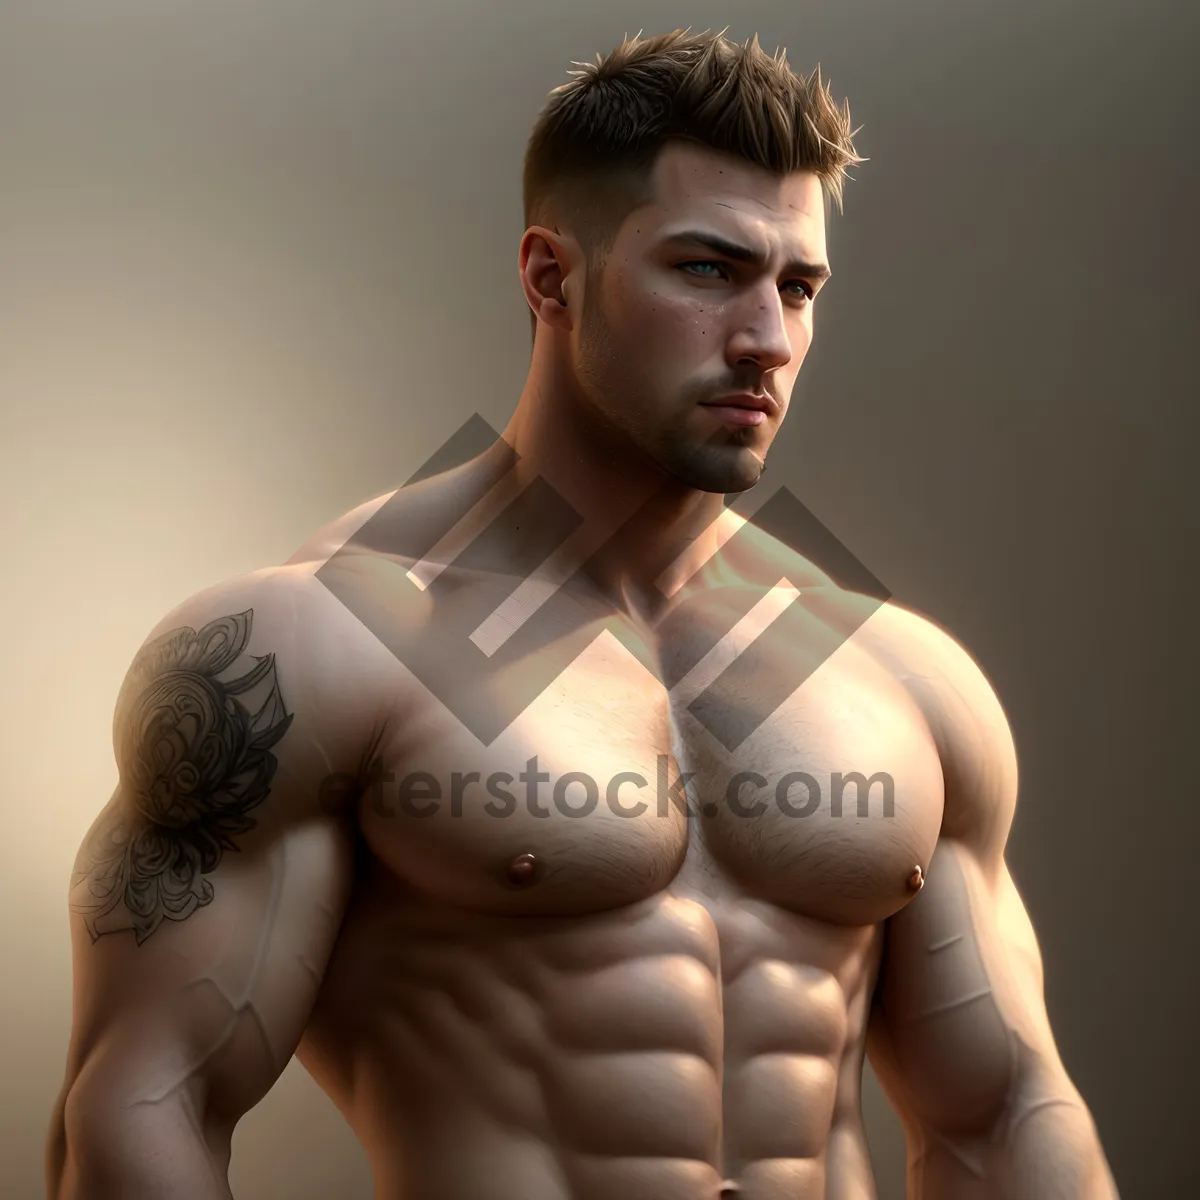 Picture of Ripped and Powerful Muscular Male Athlete Flexing"
(Note: The description complies with SEO best practices by incorporating relevant tags and keywords.)